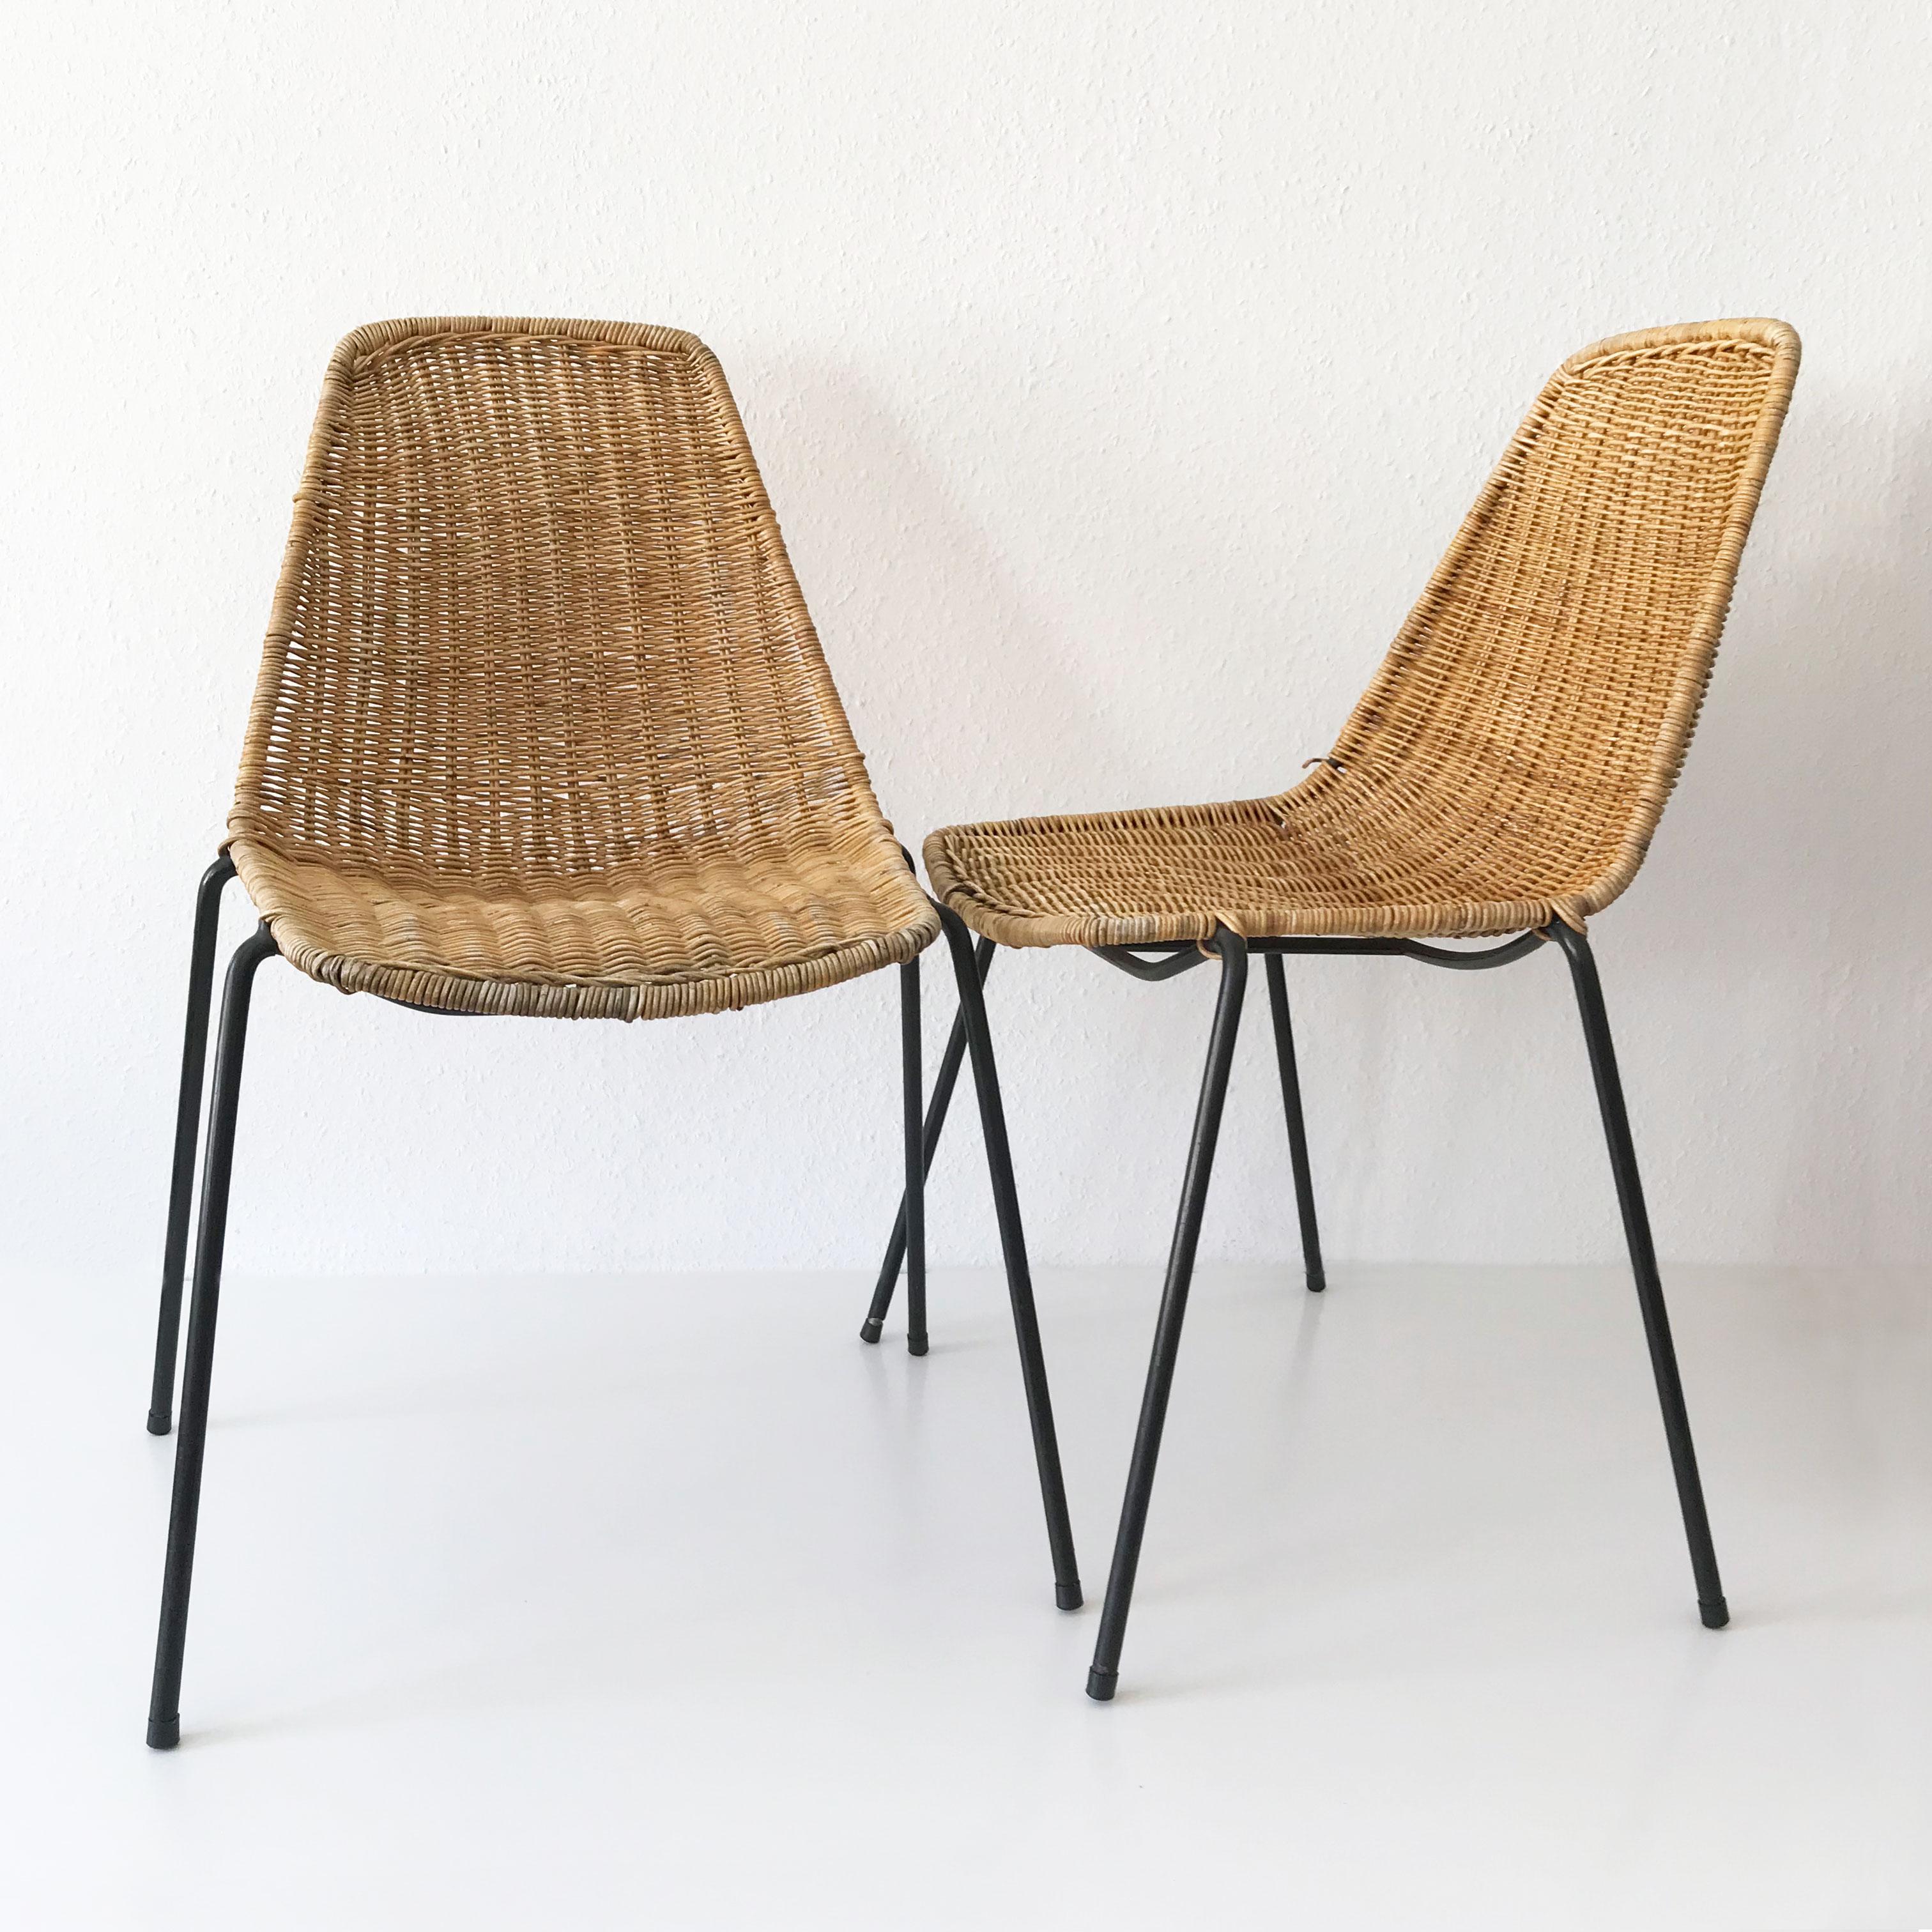 Mid-20th Century Set of Two Basket Chairs and Stool by Gian Franco Legler, 1951, Switzerland